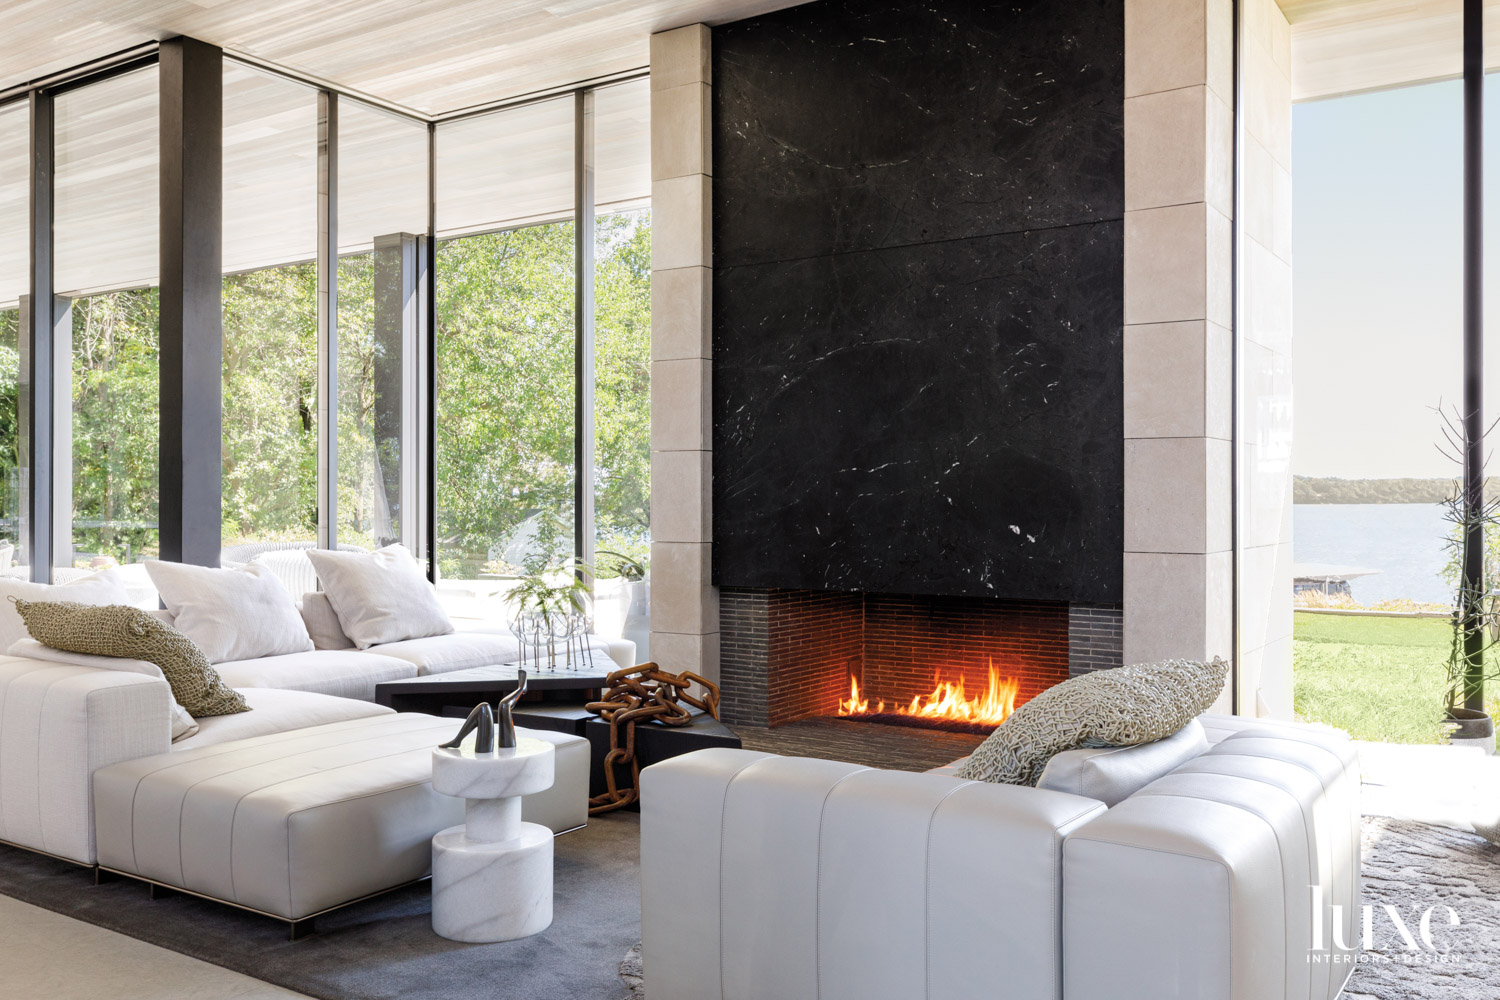 A living room with a floor-to-ceiling fireplace surrounded by white seating.